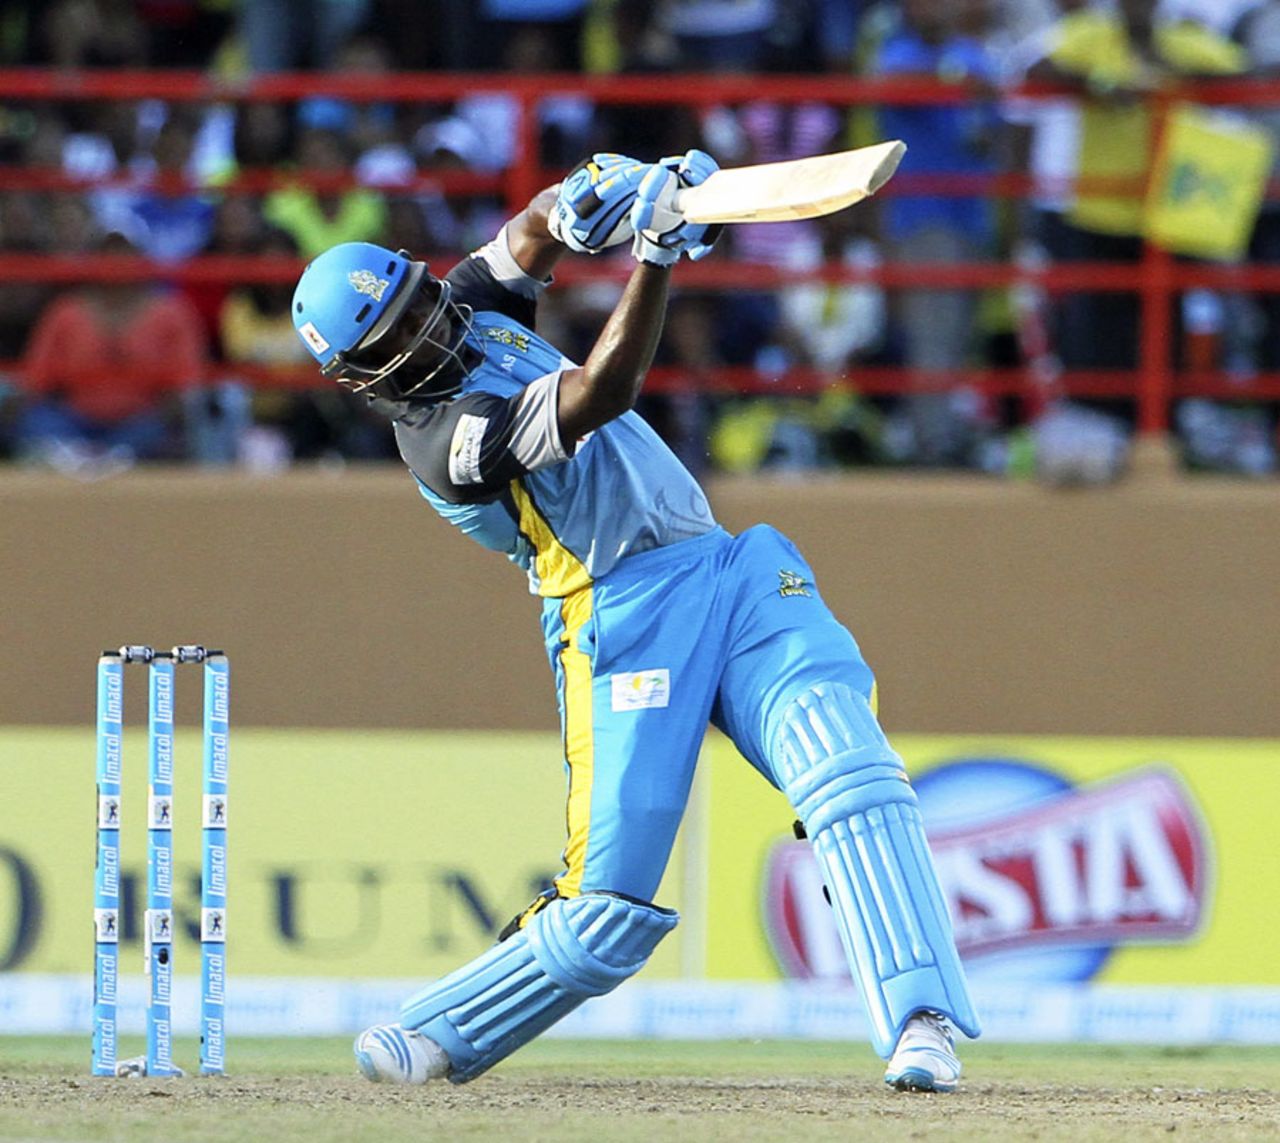 Mervin Mathew struck a couple of sixes in his 21, Guyana Amazon Warriors v St Lucia Zouks, CPL 2014, Providence, July 19, 2014